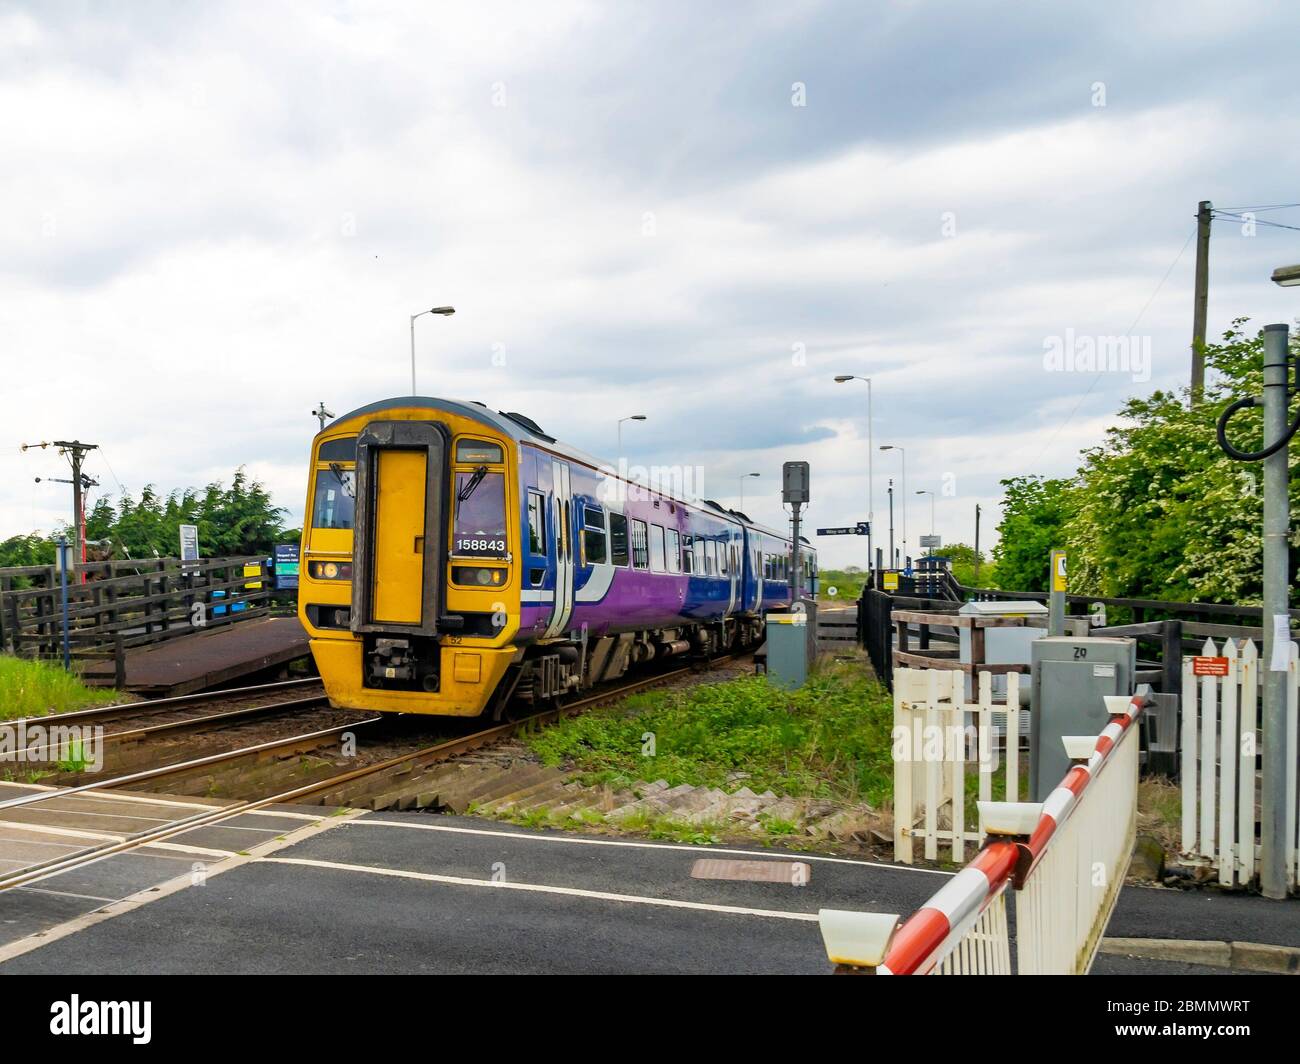 Northern Rail train 158843 leaving Longbeck on its way to Marske and Saltburn .  This is a refurbished Class 158 train replacing the previous Pacers. Stock Photo